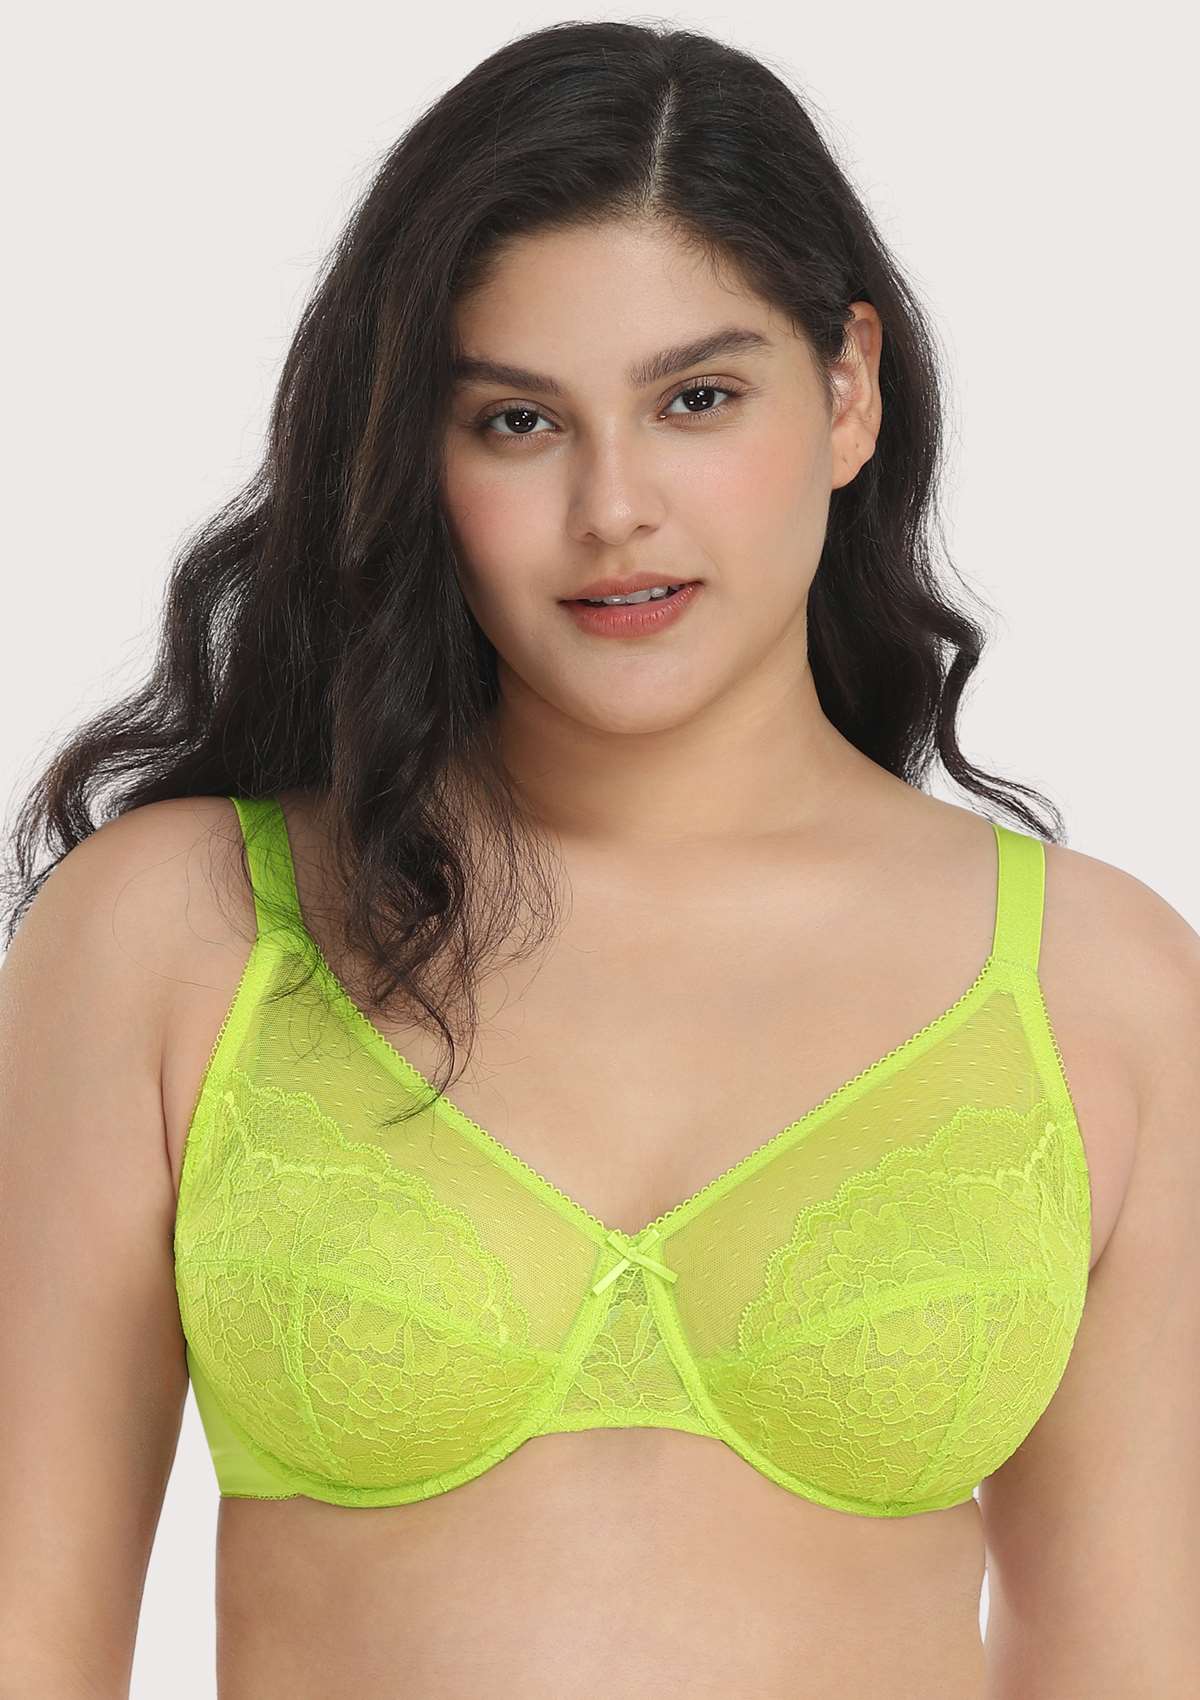 HSIA Enchante Full Cup Minimizing Bra: Supportive Unlined Lace Bra - Lime Green / 34 / DD/E